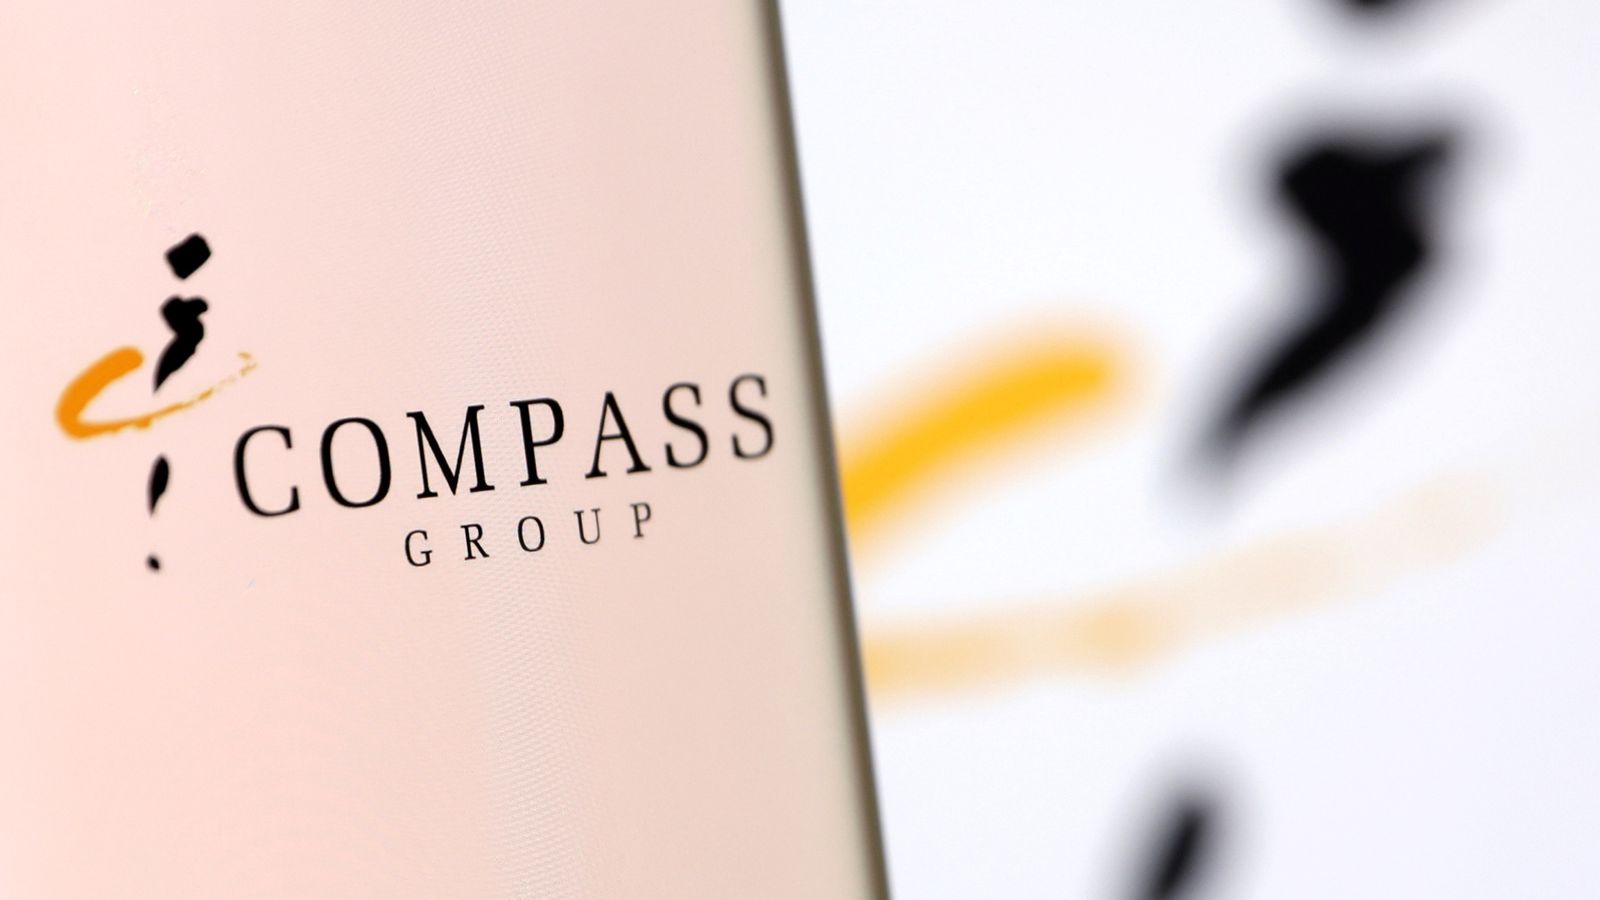 World's biggest contract catering company Compass sees 'significant new business opportunities' ahead